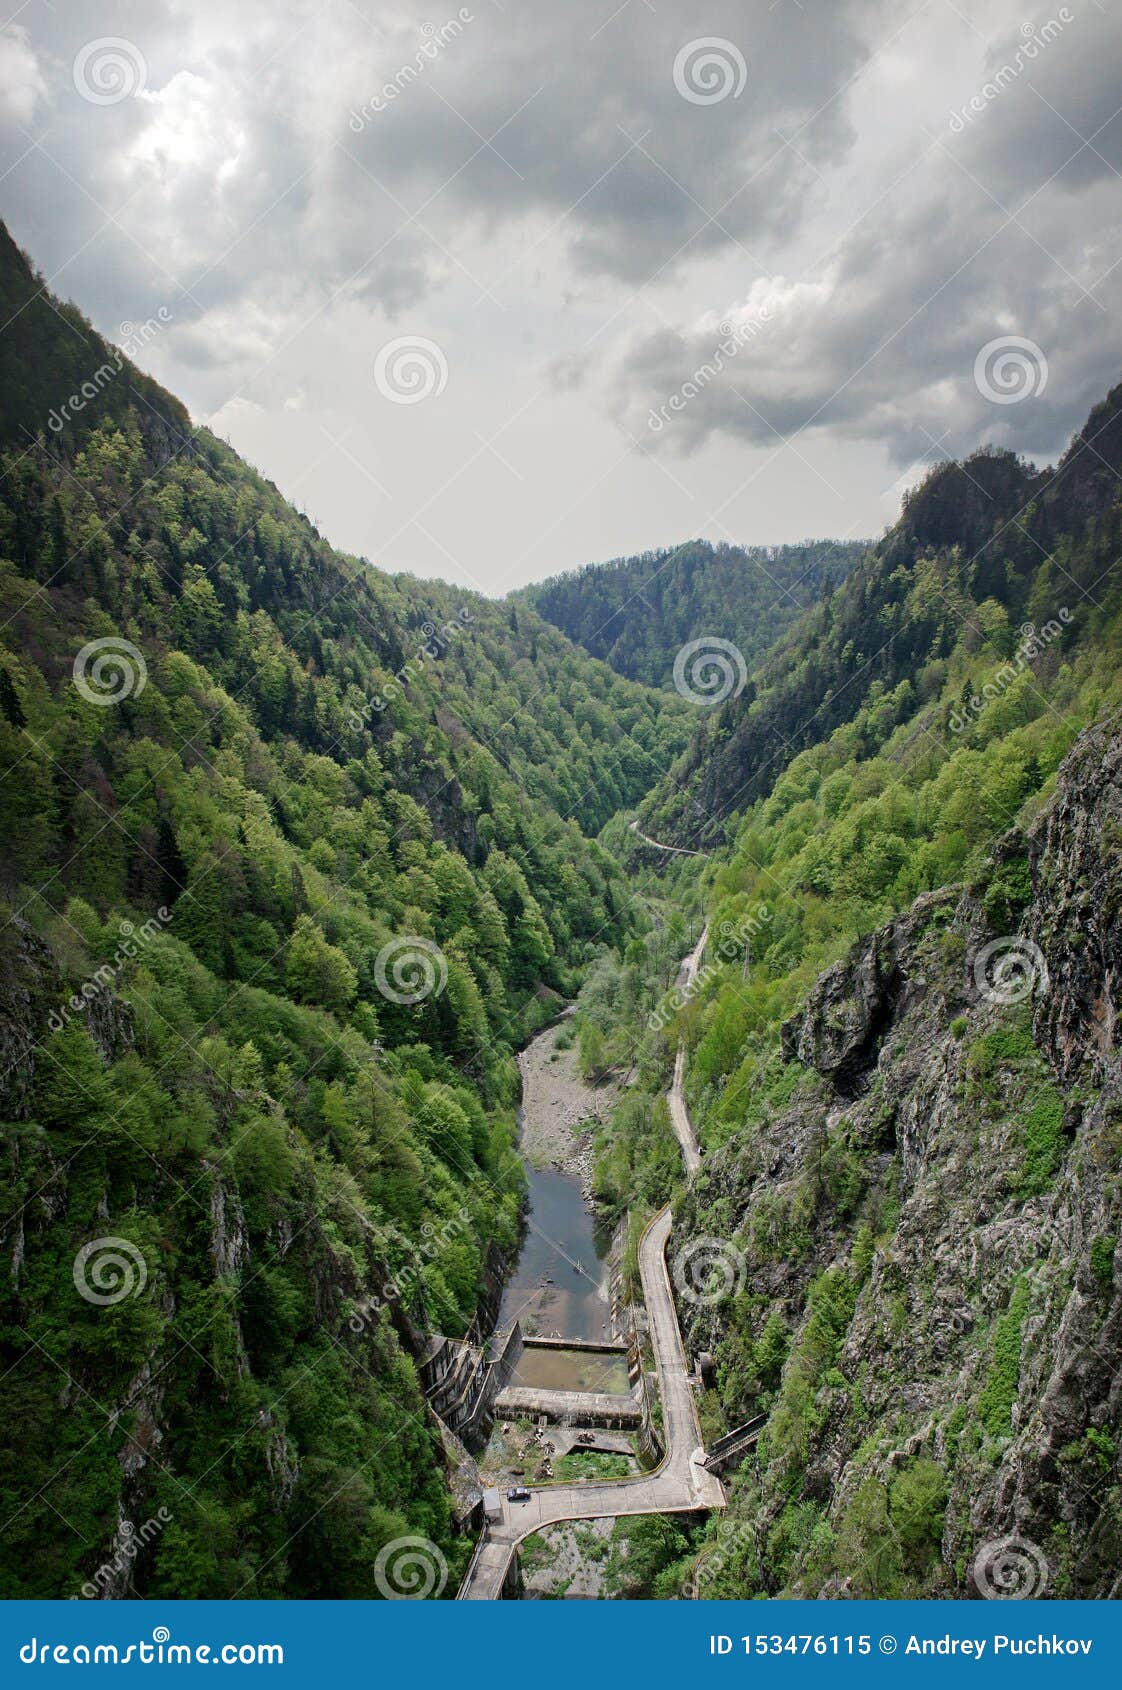 Person in charge accent Transcend Vidraru Dam or Barajul Vidraru Stock Image - Image of arges, hydroelectric:  153476115